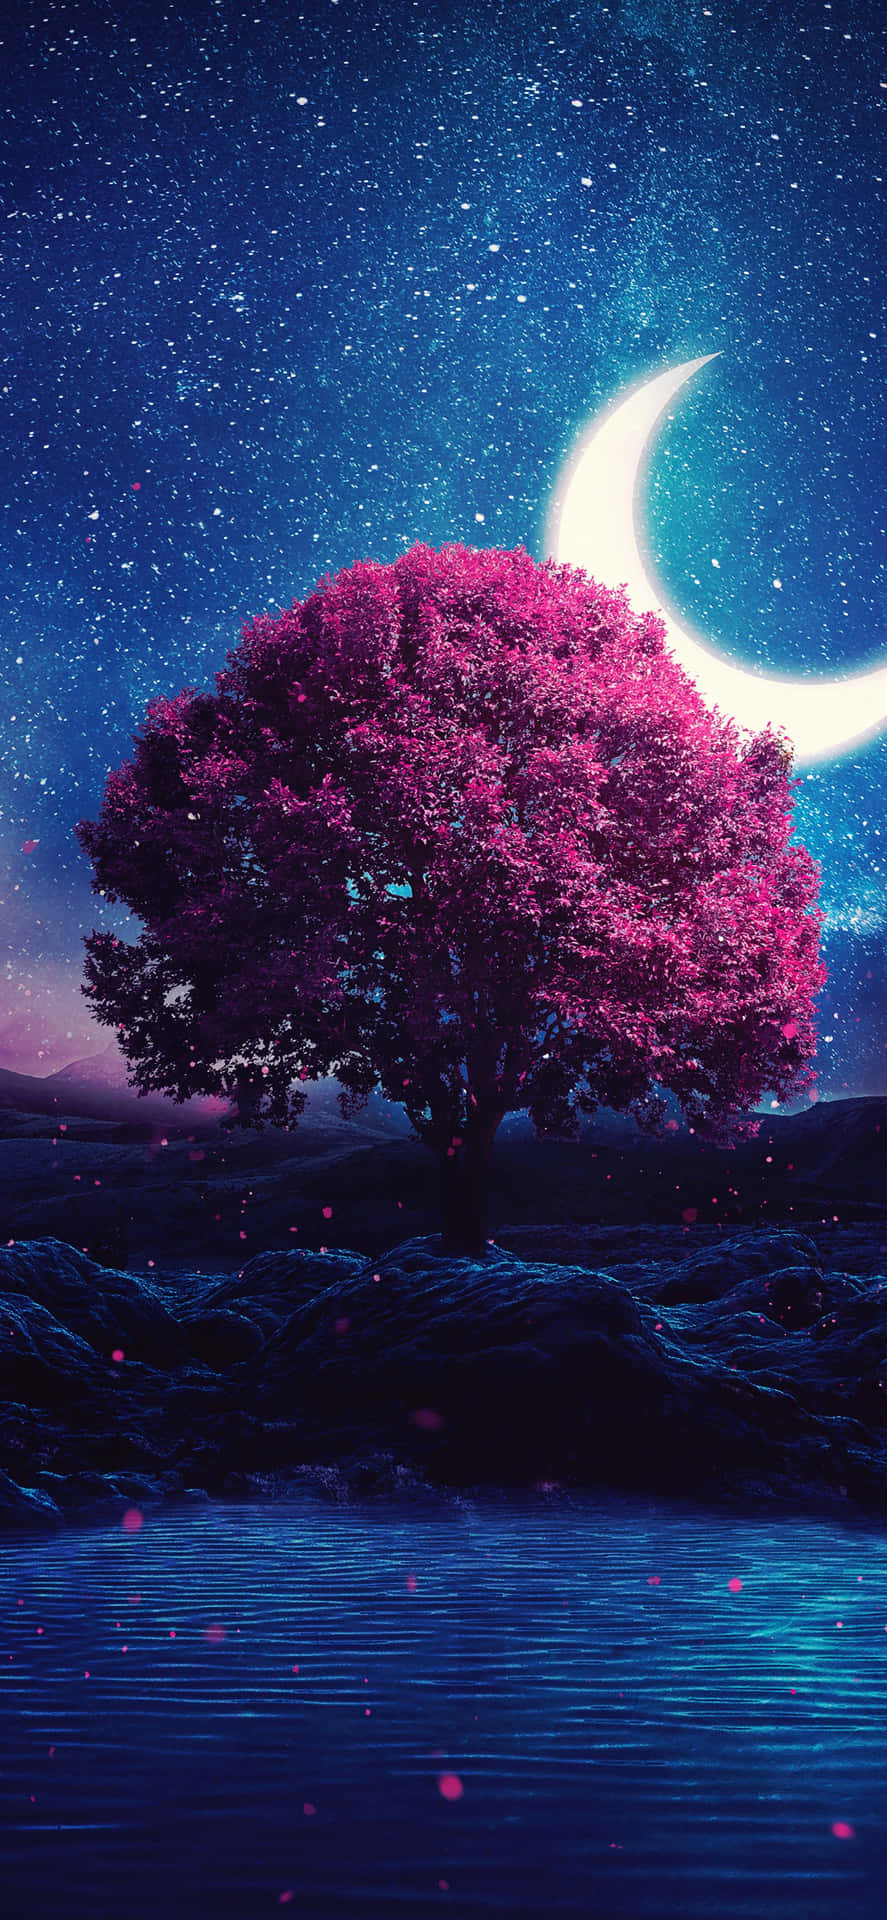 A Tree With A Crescent And Stars In The Sky Wallpaper